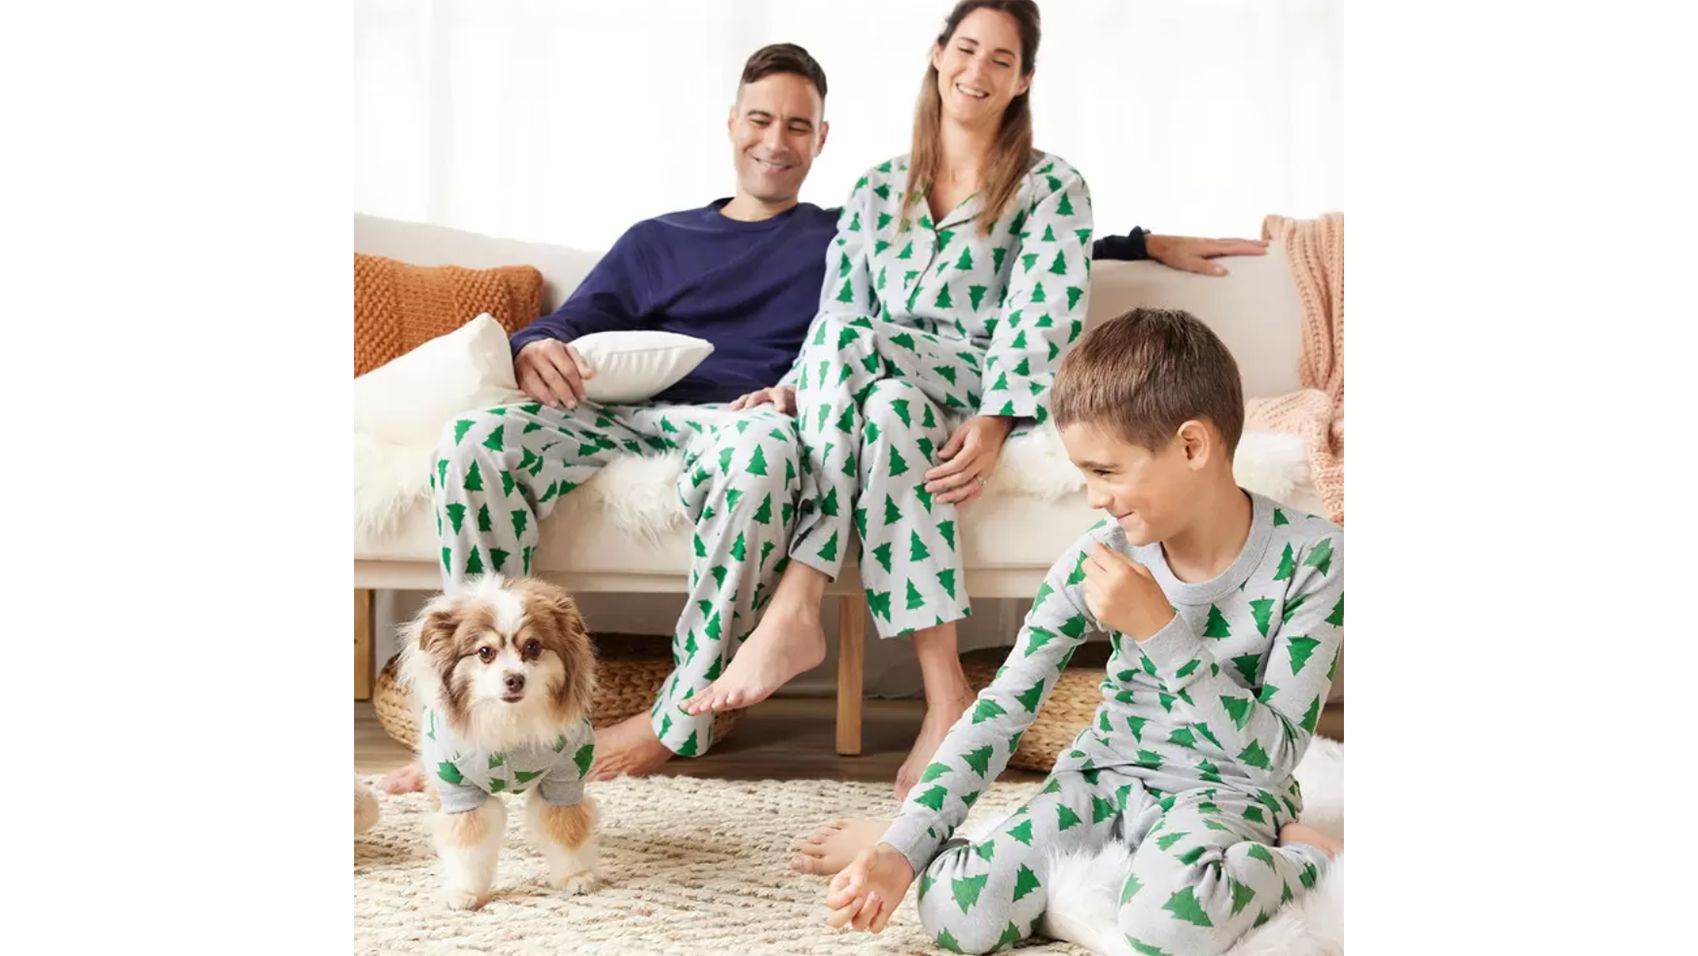 Dinosaur Print Family Pajama Outfits For Halloween Party Soft